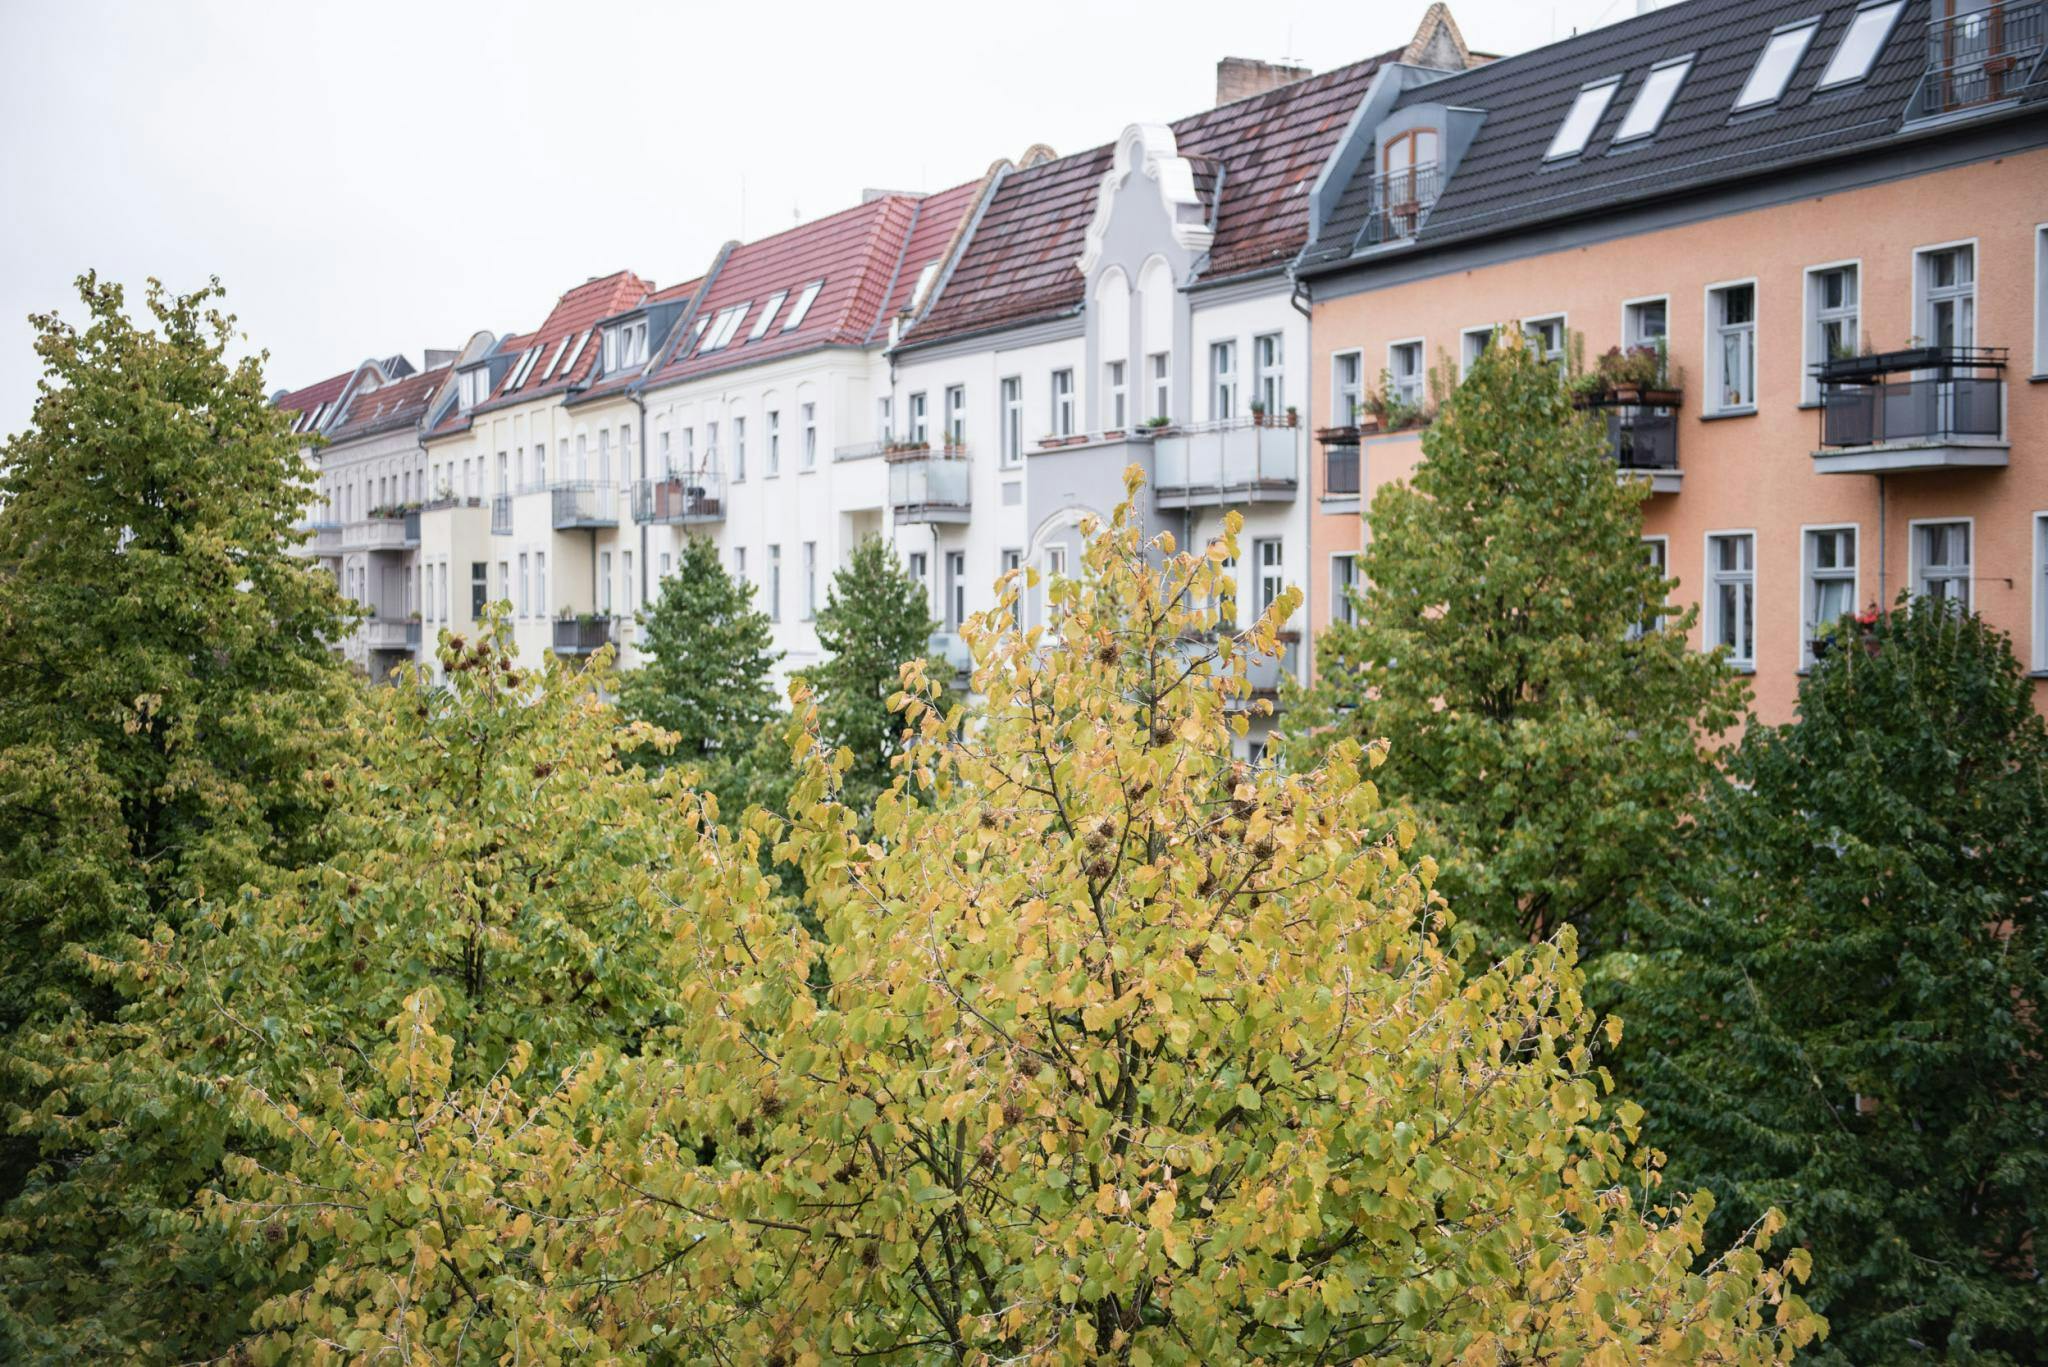 The image features a row of tall, multi-story buildings with a mix of yellow and green trees in front of them. The trees are scattered throughout the scene, with some closer to the buildings and others further away. The buildings are situated in a city setting, with a few of them having balconies.

There are several people visible in the scene, with one person standing near the middle of the image and others scattered throughout the area. The overall atmosphere of the image is lively and bustling, with the combination of the buildings, trees, and people creating a vibrant urban landscape.